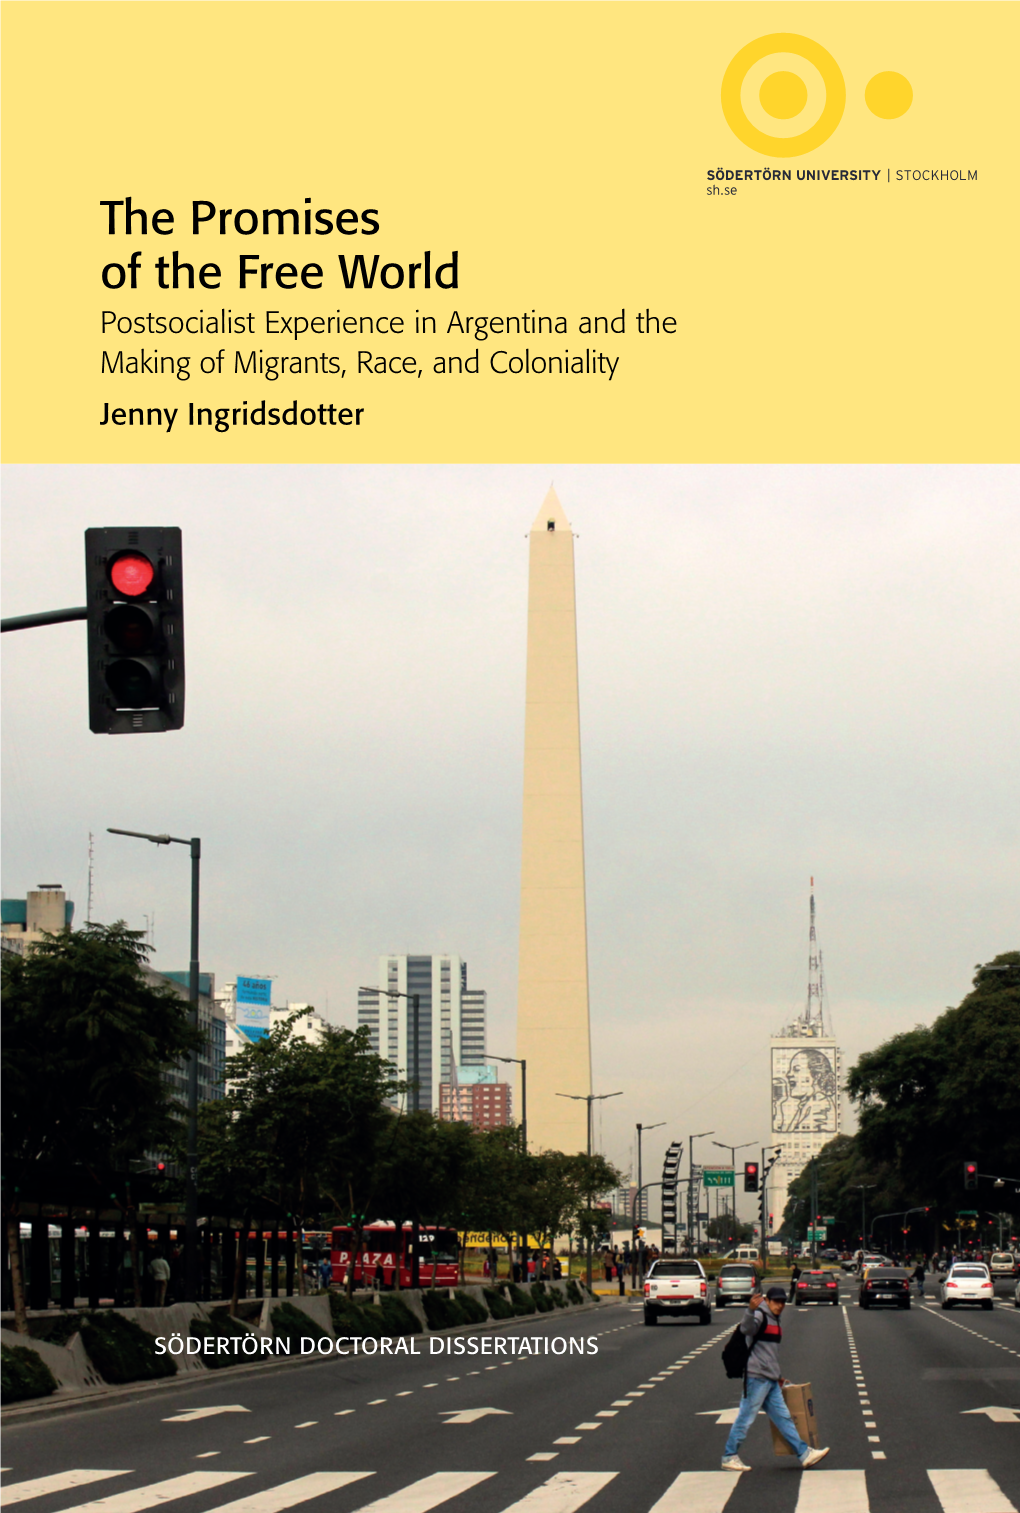 The Promises of the Free World Postsocialist Experience in Argentina and the Making of Migrants, Race, and Coloniality Jenny Ingridsdotter